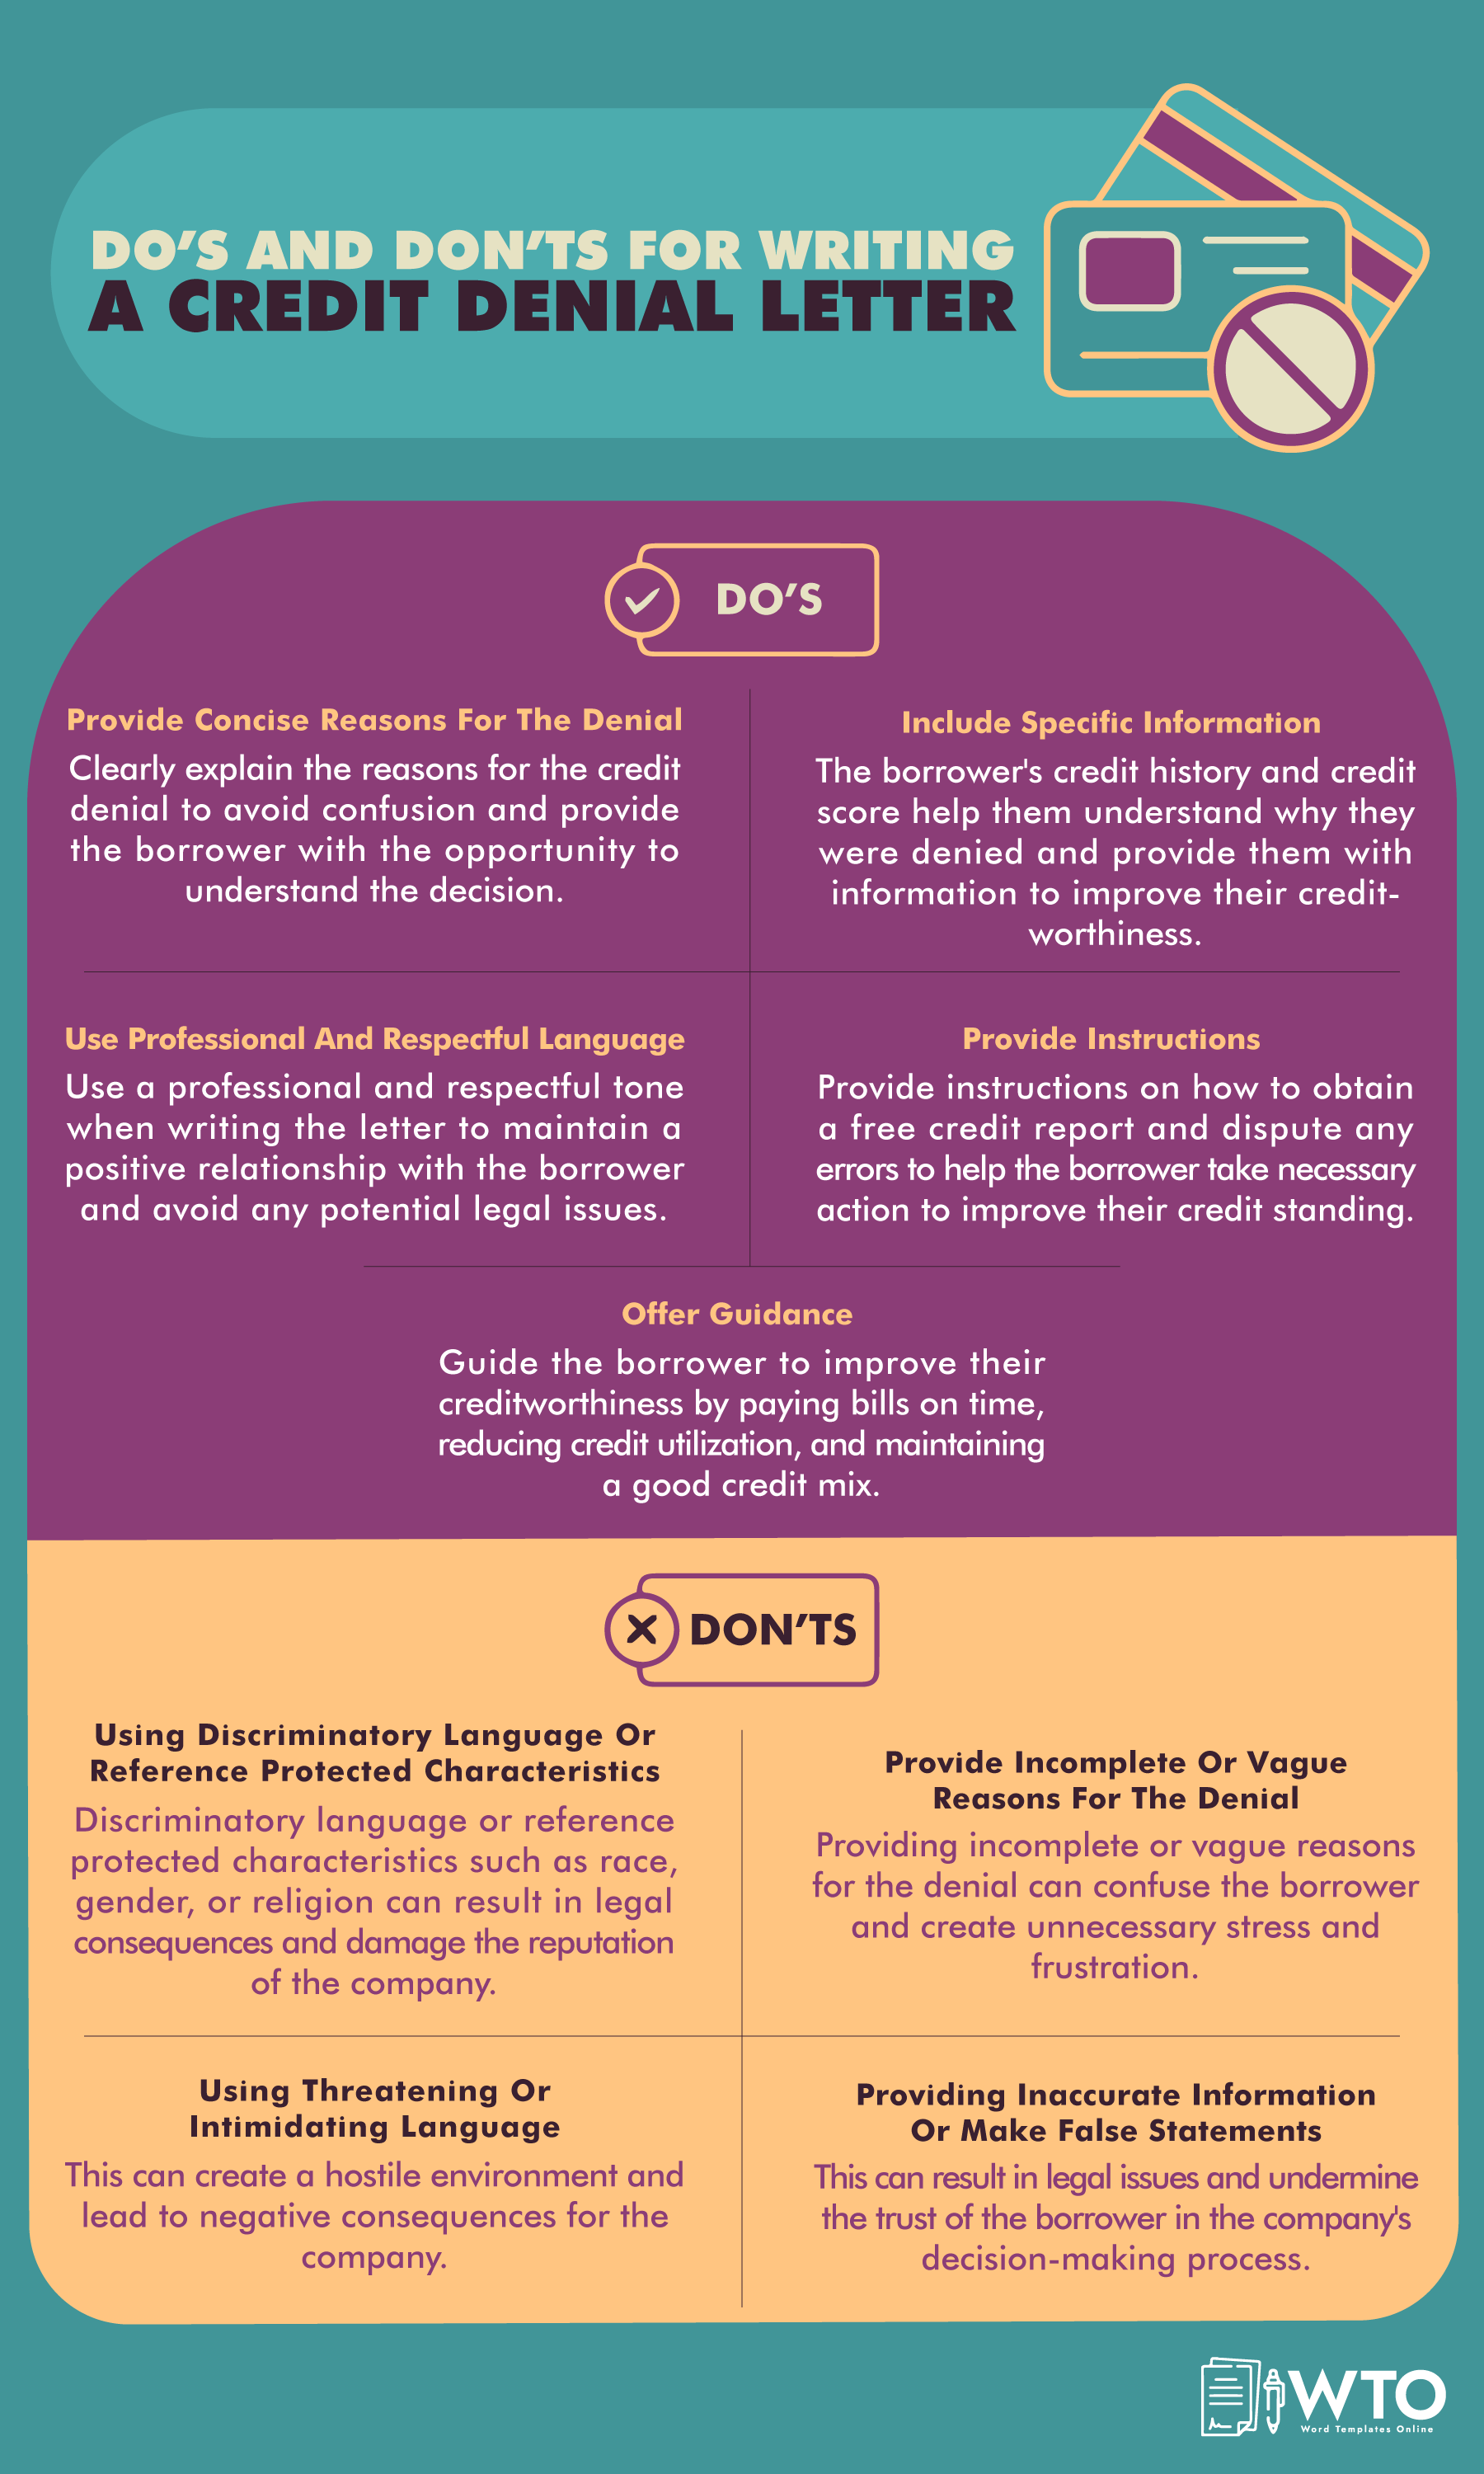 This infographic is about do's and don'ts for writing credit denial letter.